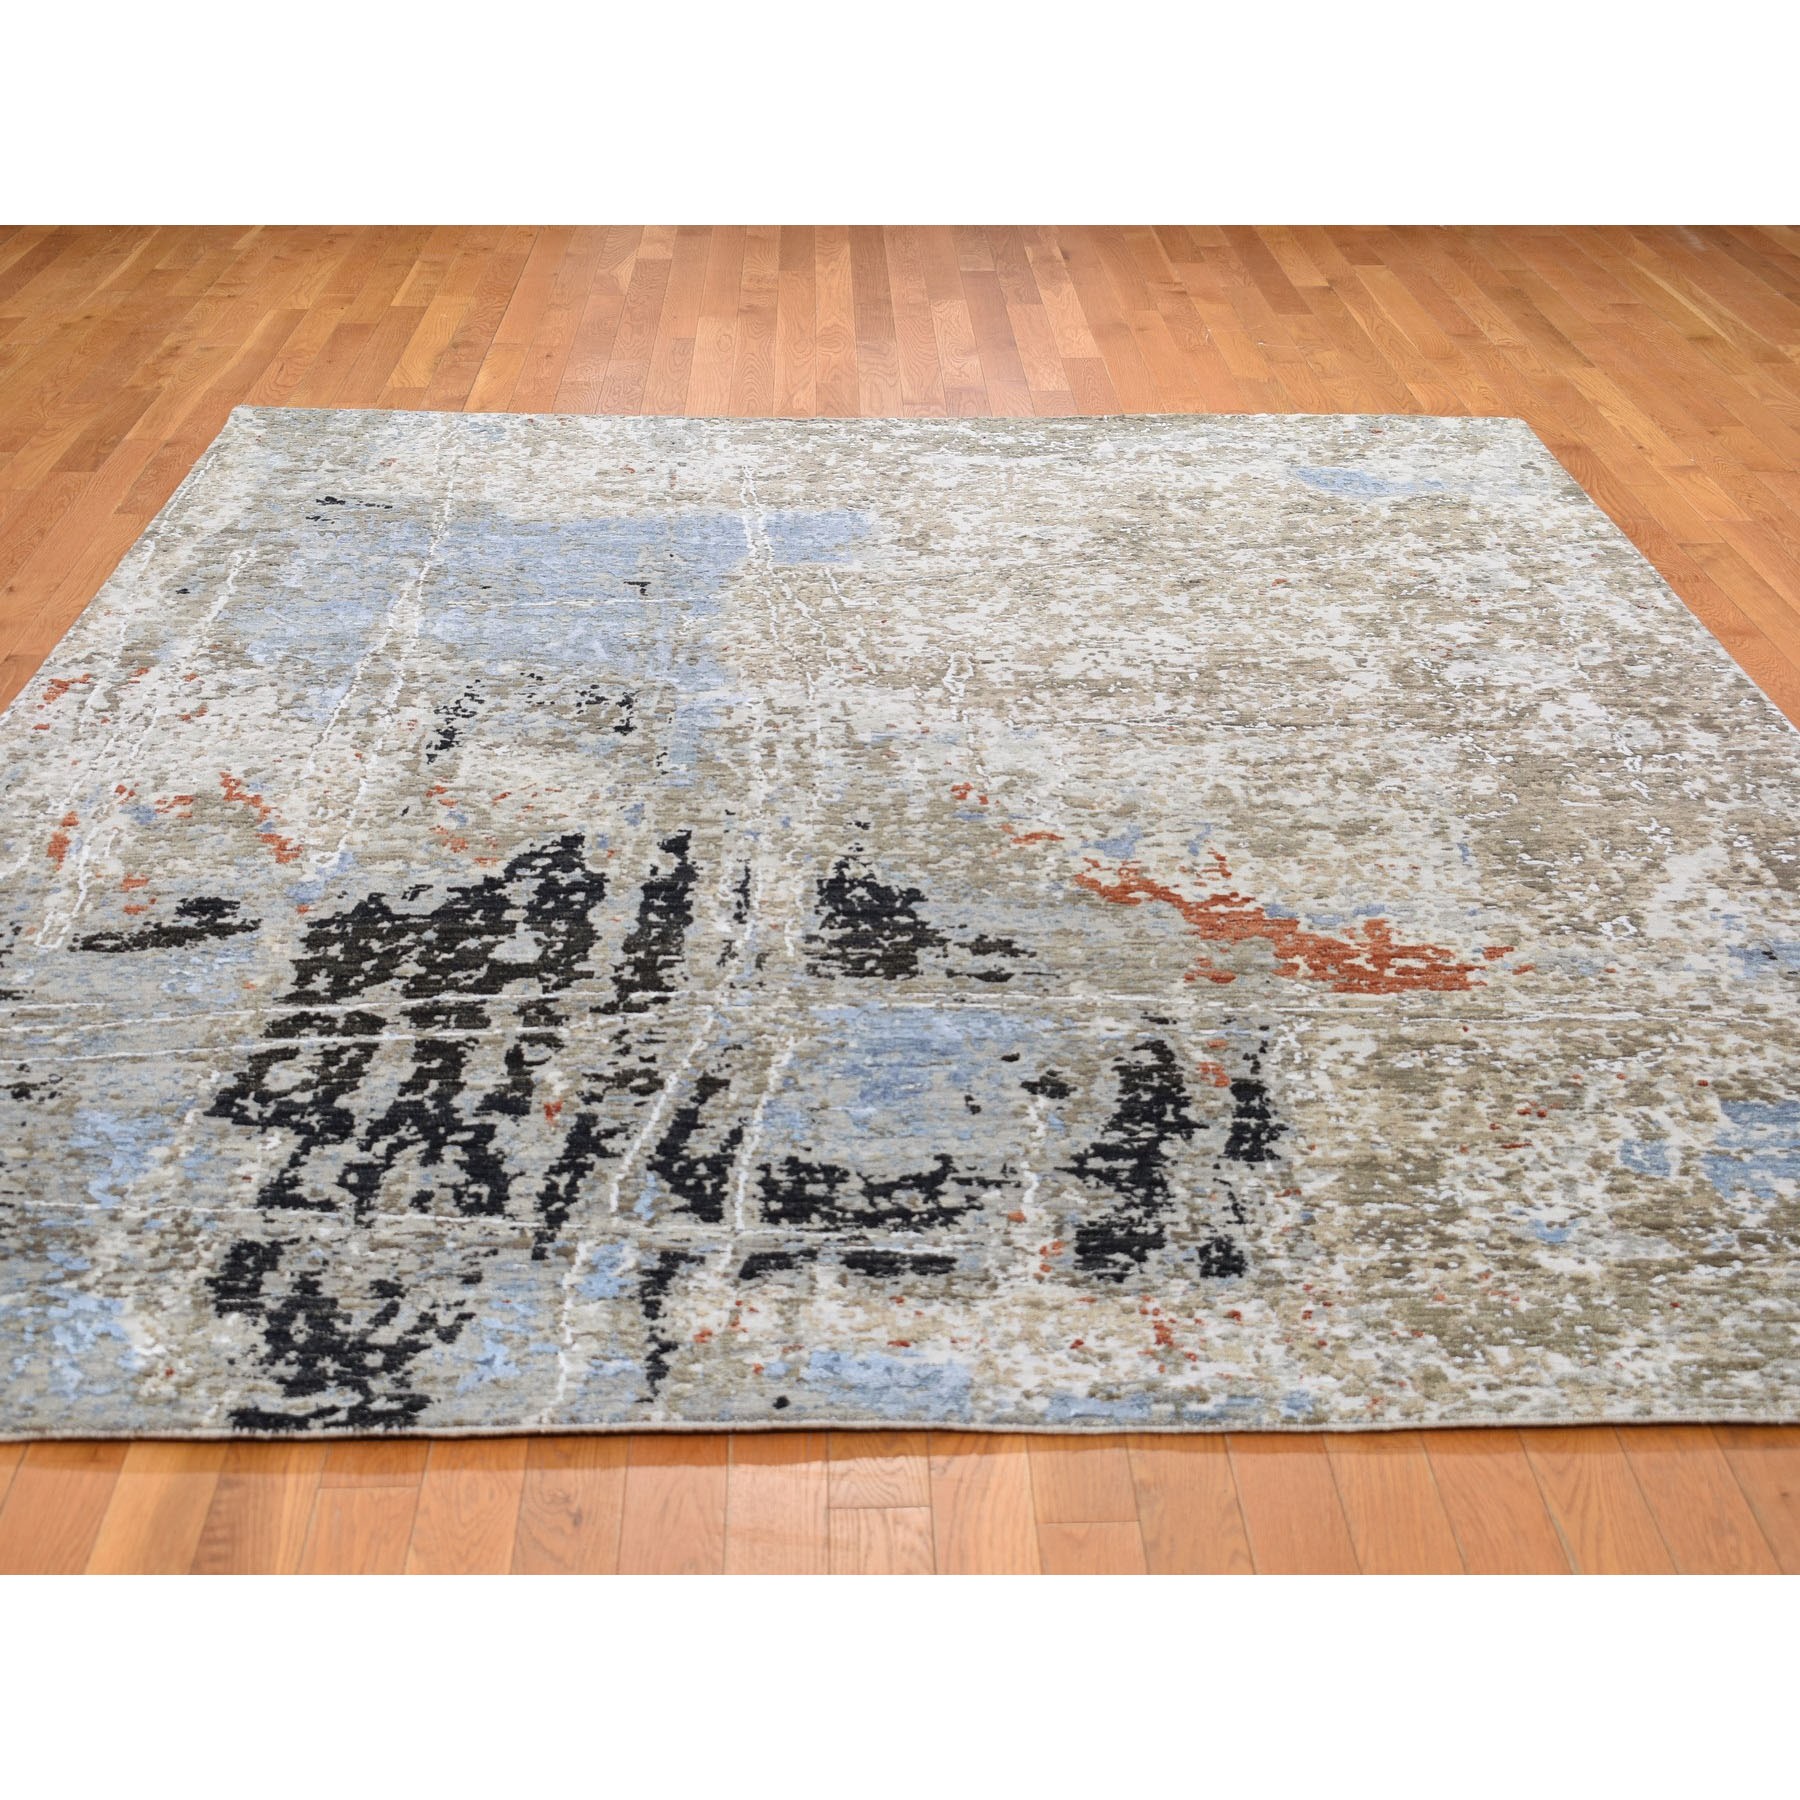 8-x10-2  Abstract Design Wool and Silk Hi-Low Pile Tight Knot Hand Knotted Oriental Rug 